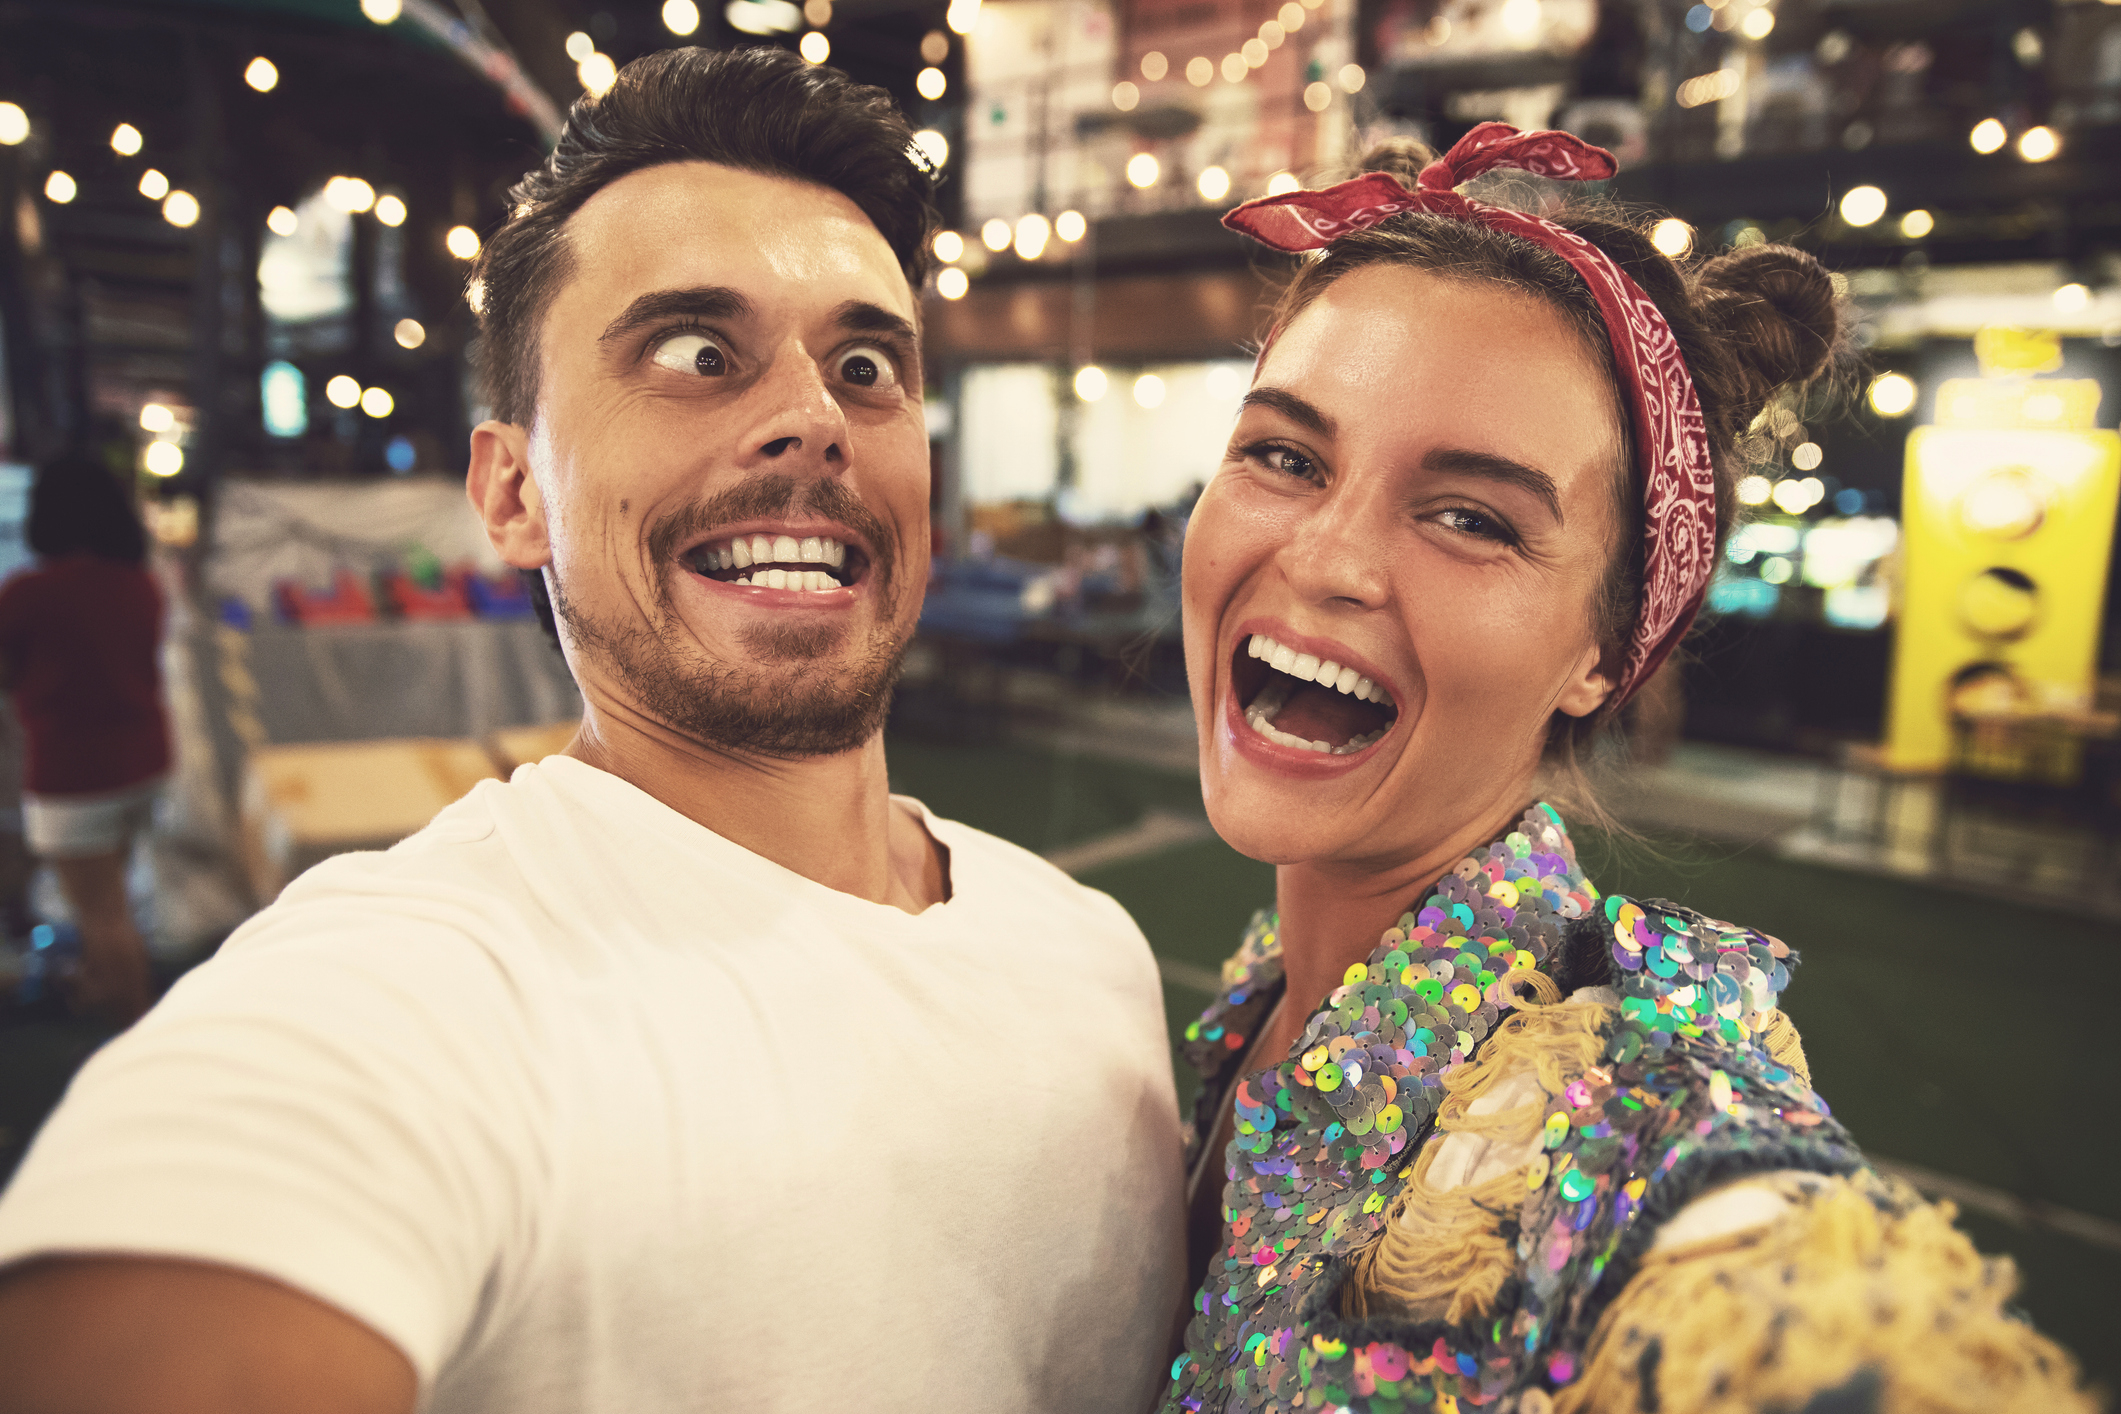 Two people taking a playful selfie, one wearing a sequined top, the other in a plain tee, both smiling widely